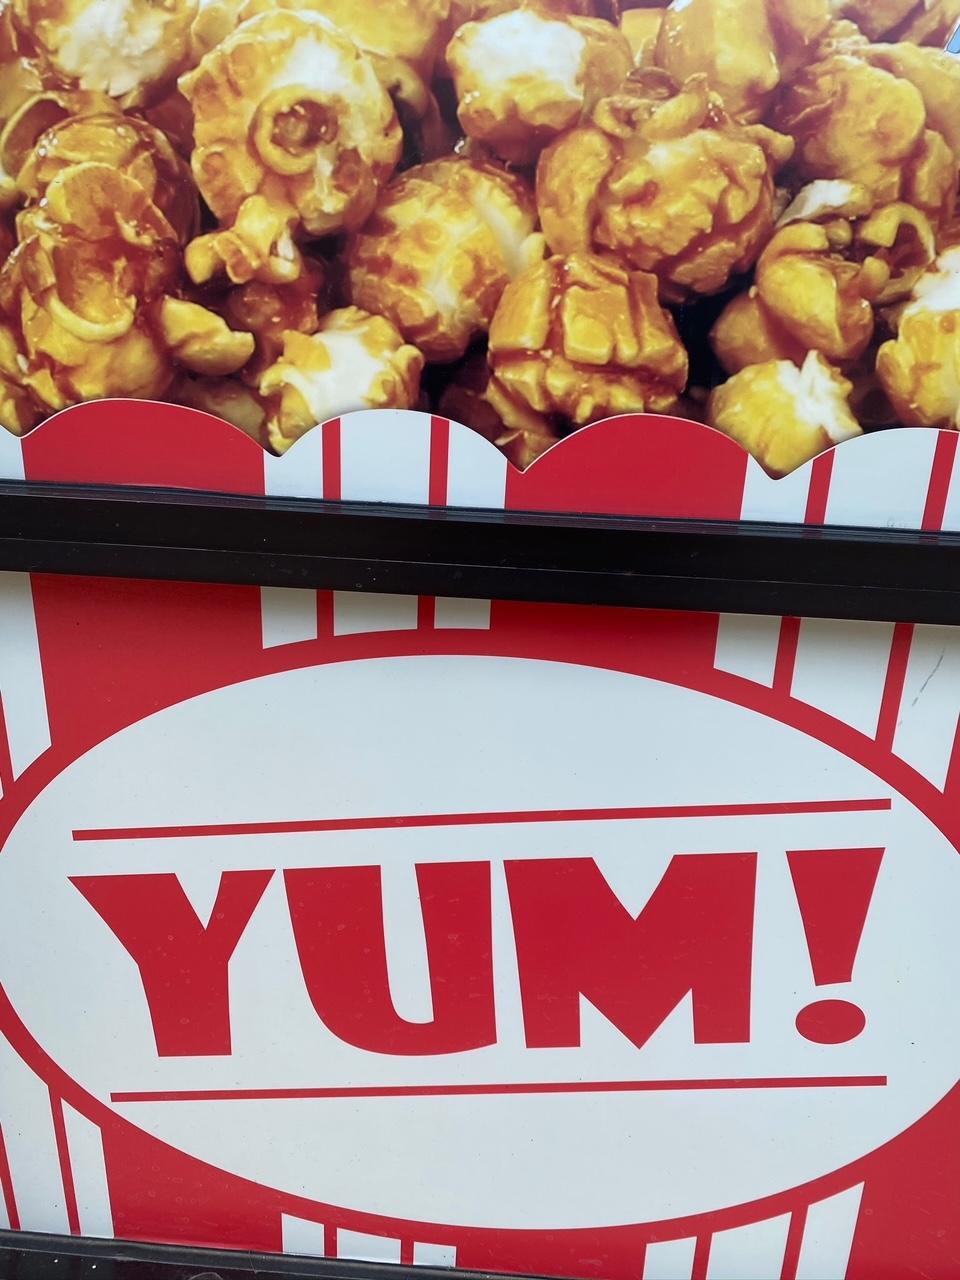 Yum! on a sign in store window with caramel popcorn on top